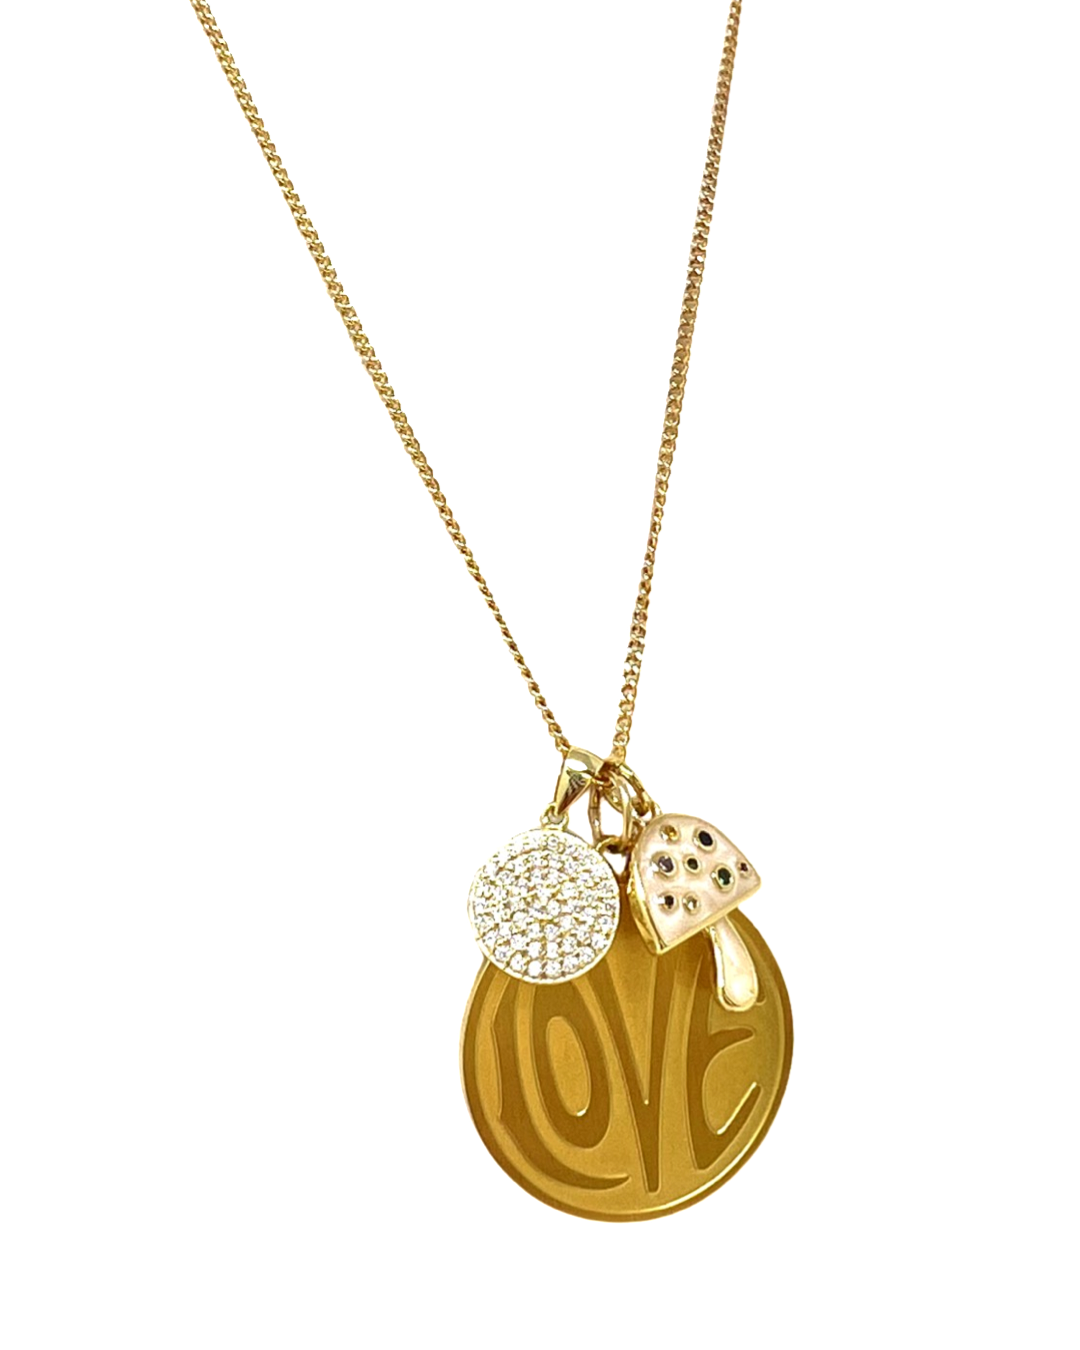 Shroom Love Charm Necklace in Gold